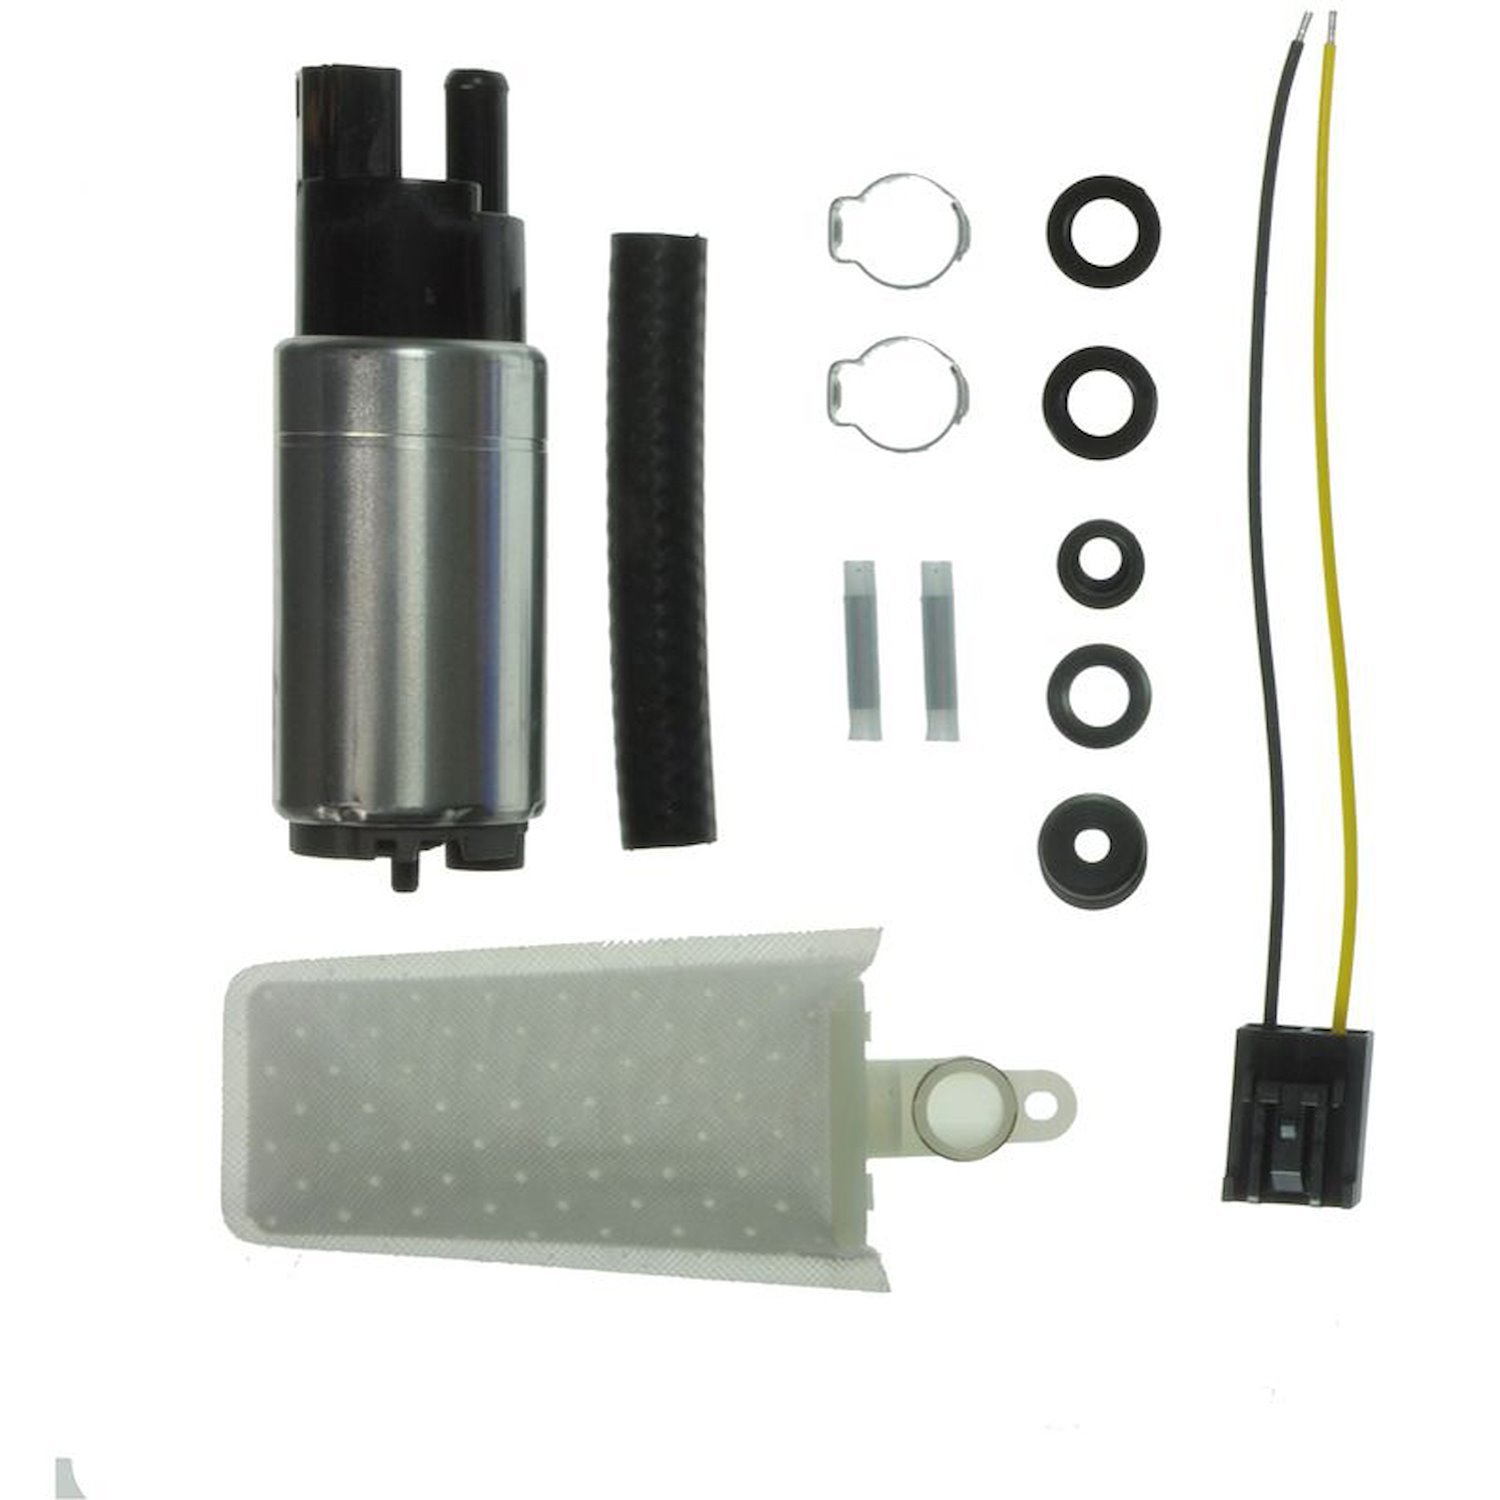 EFI In-Tank Electric Fuel Pump And Strainer Set for 1987-1988 Nissan Sentra